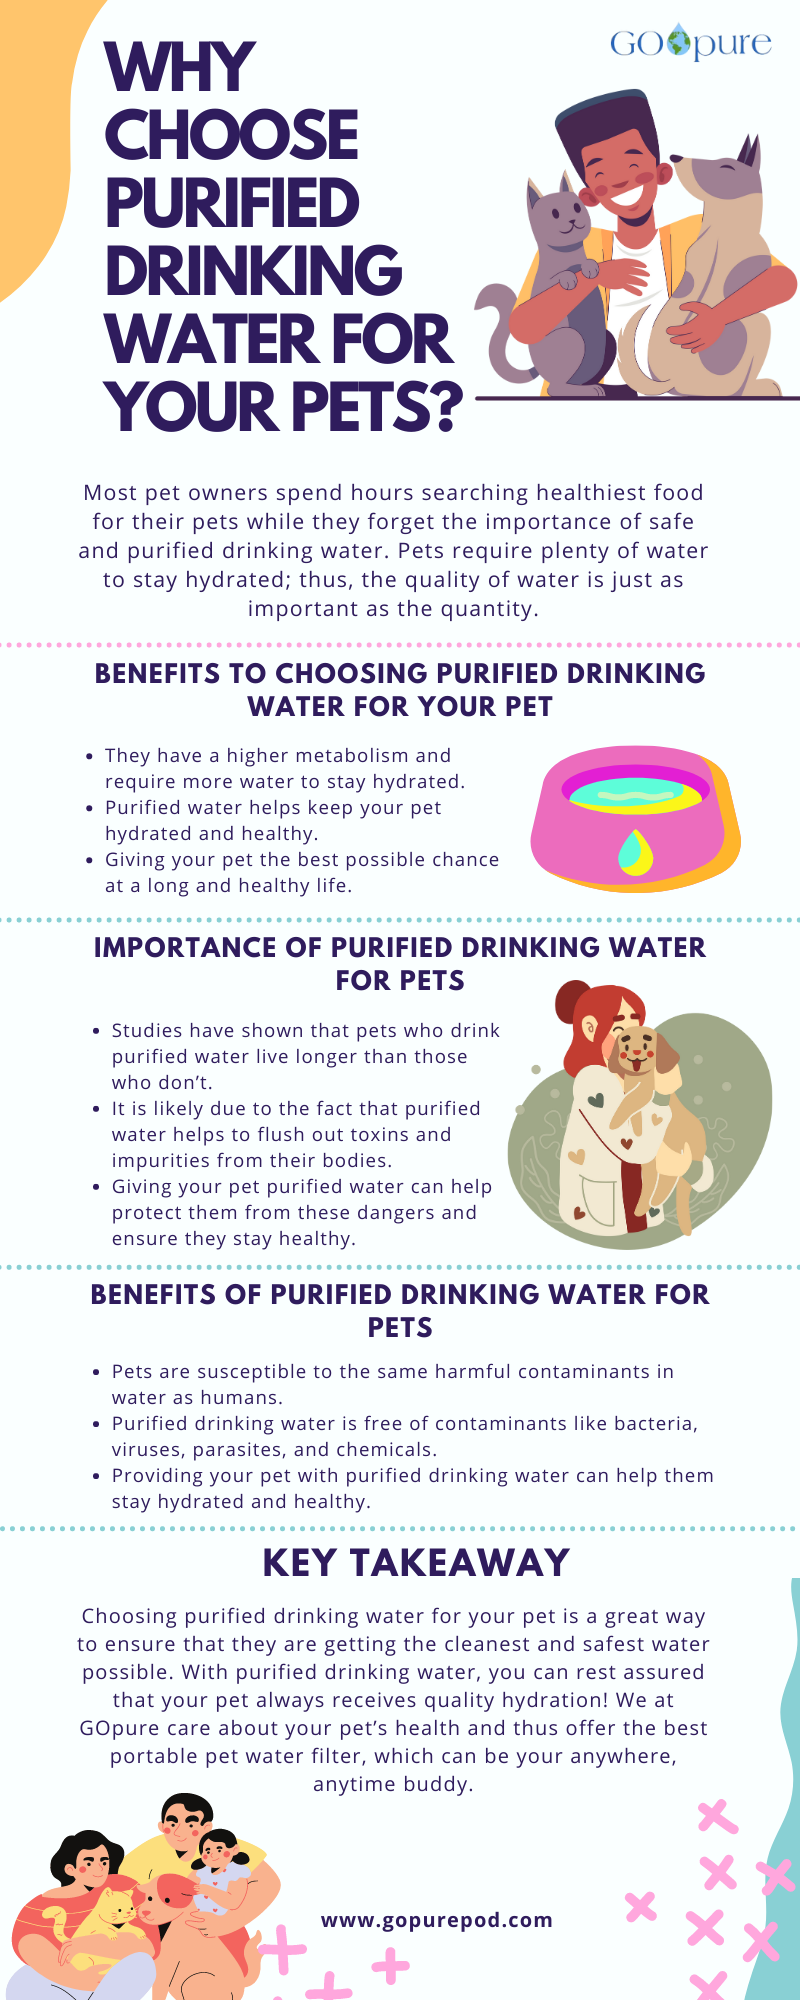 Why Choose Purified Drinking Water for Your Pets?